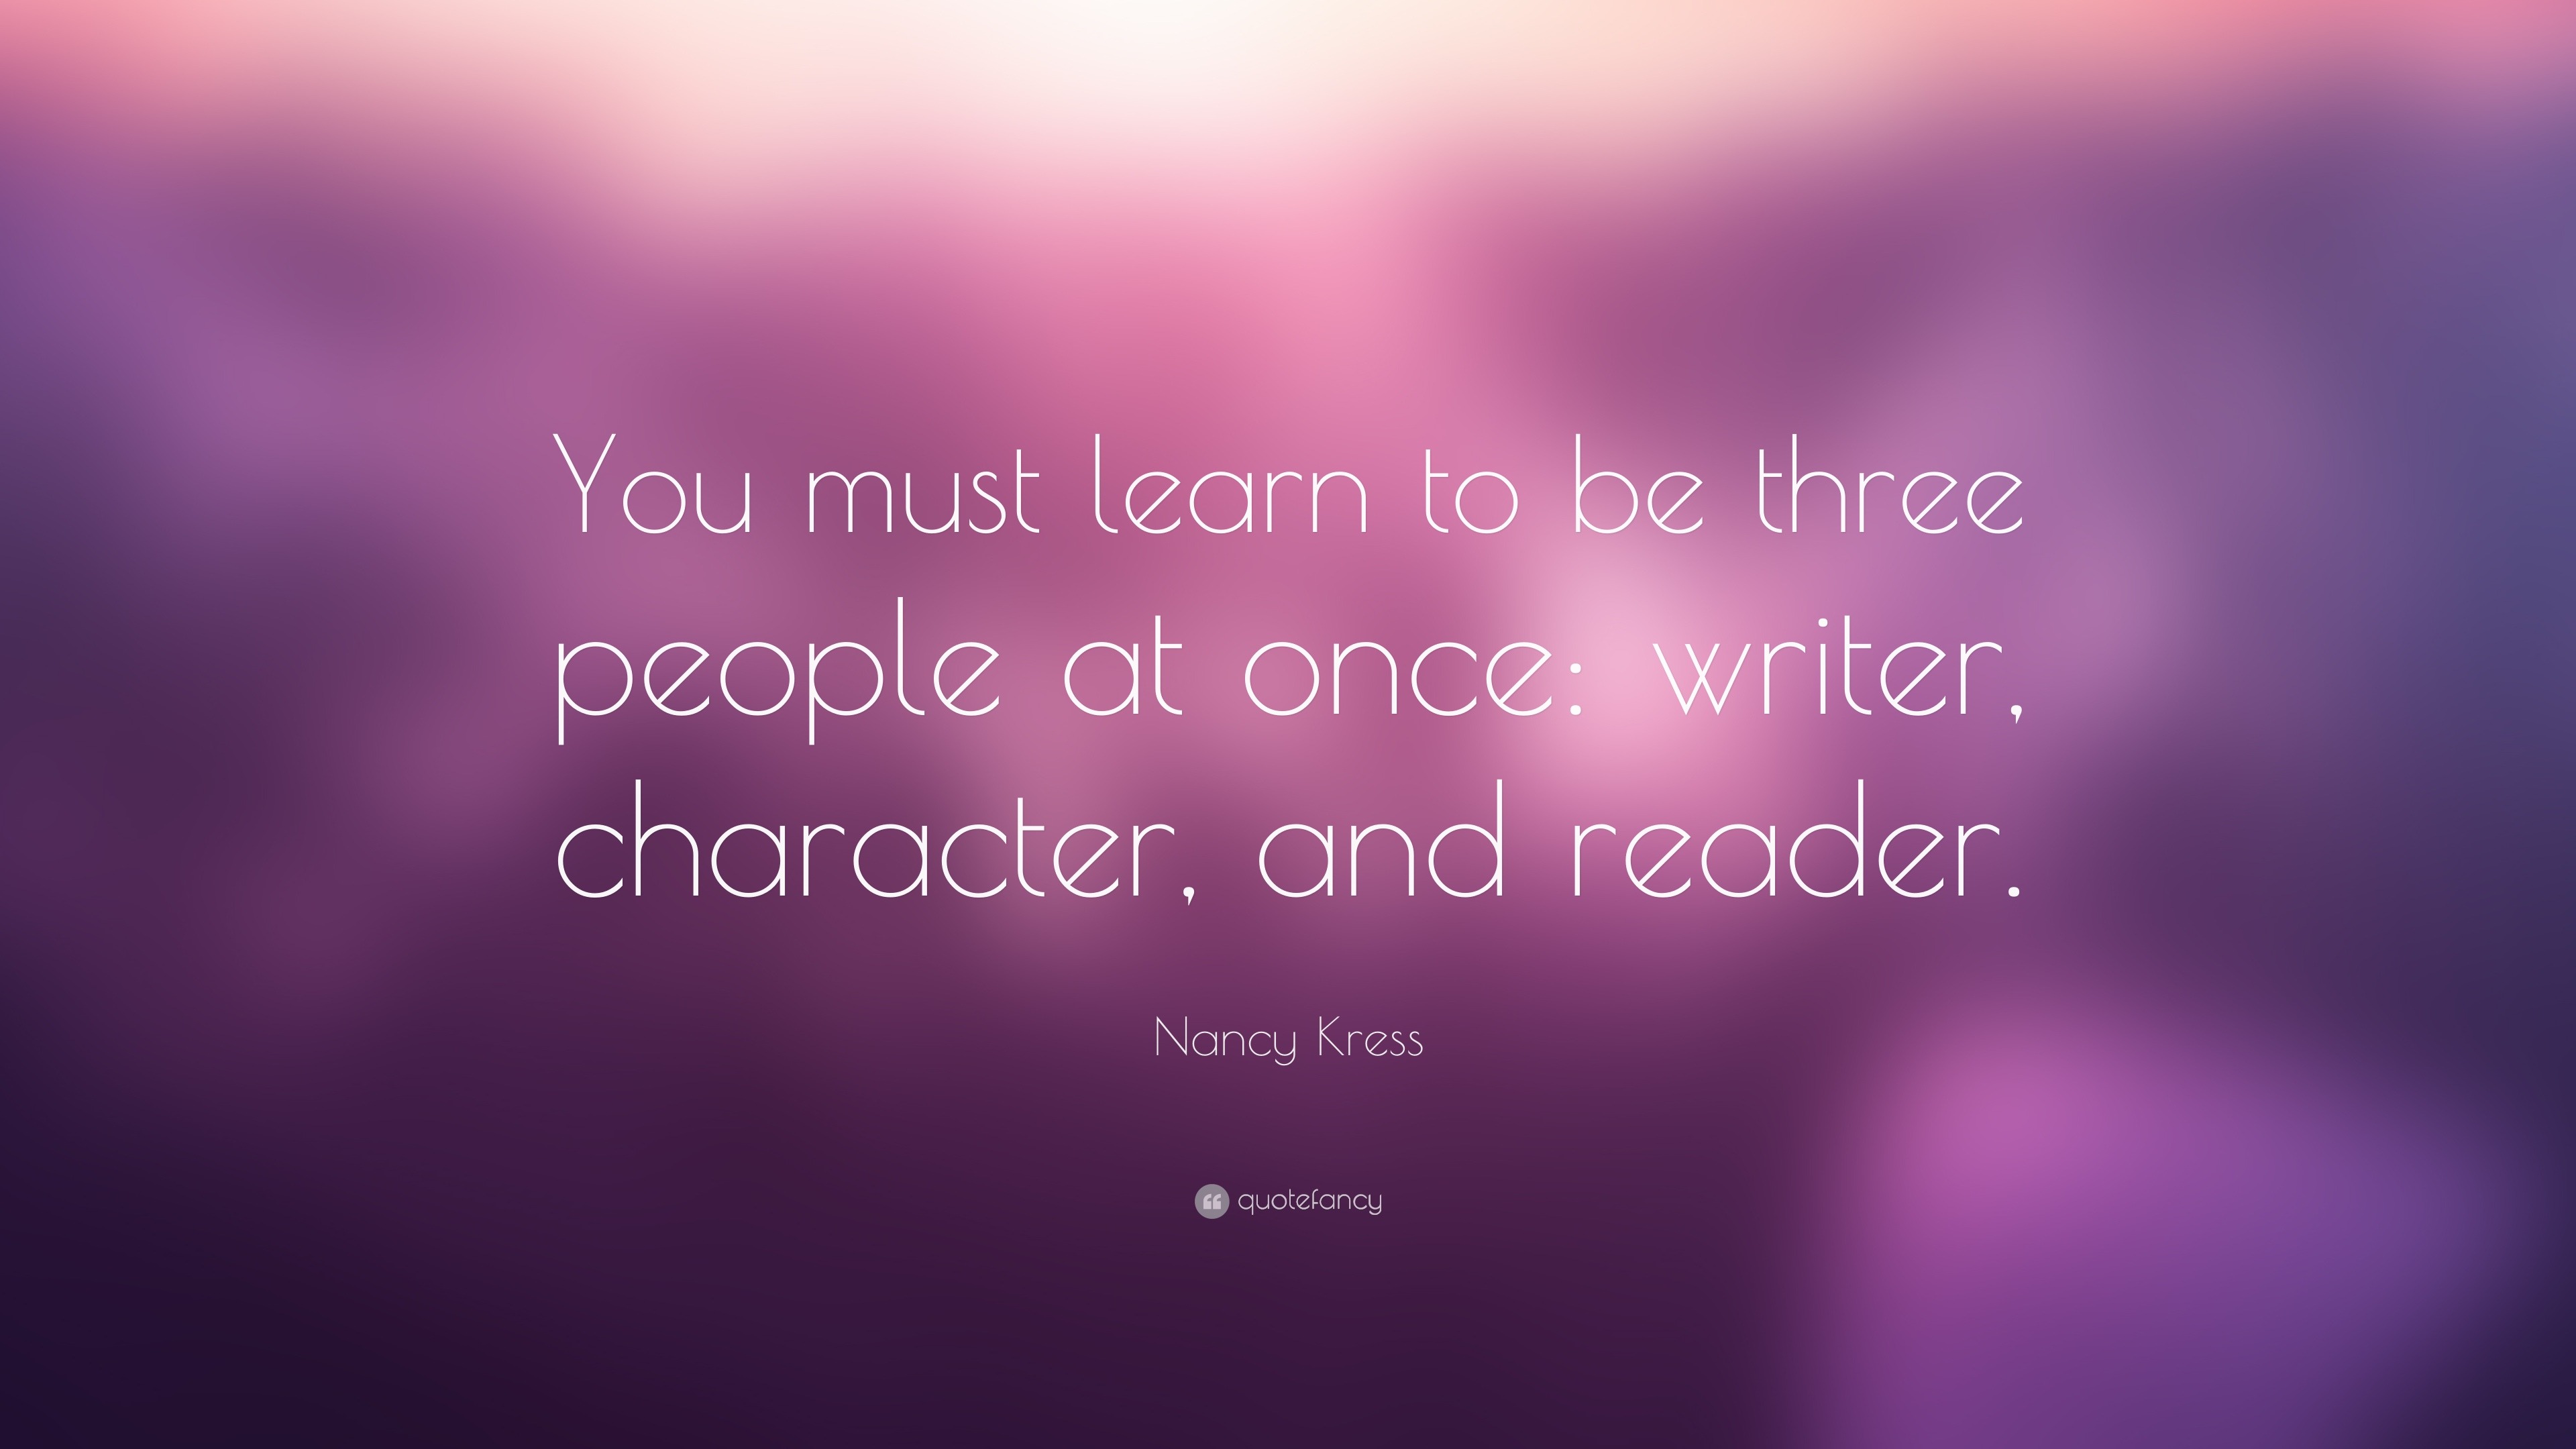 Nancy Kress Quote: “You must learn to be three people at once: writer ...